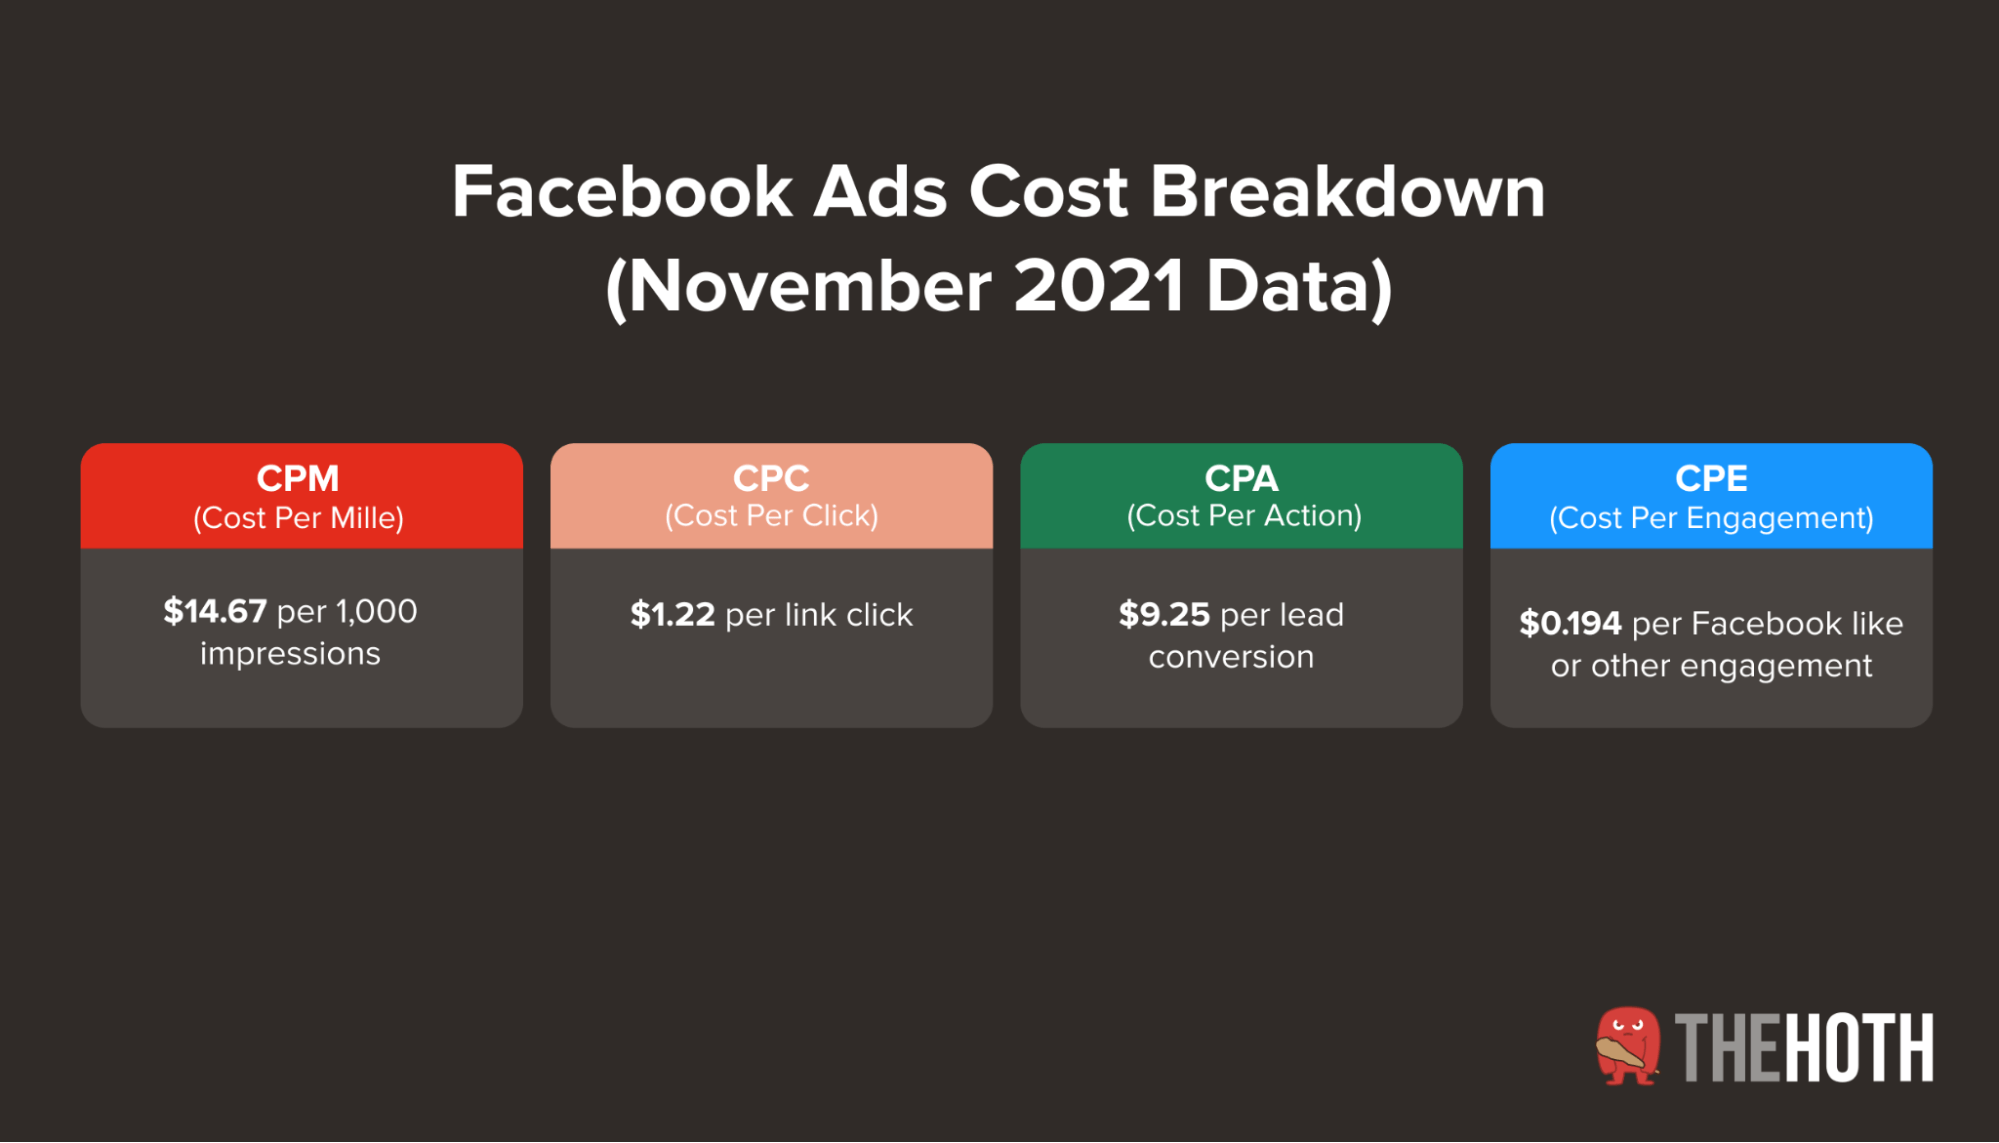 How Much Do Facebook Ads Cost in 2022? The HOTH